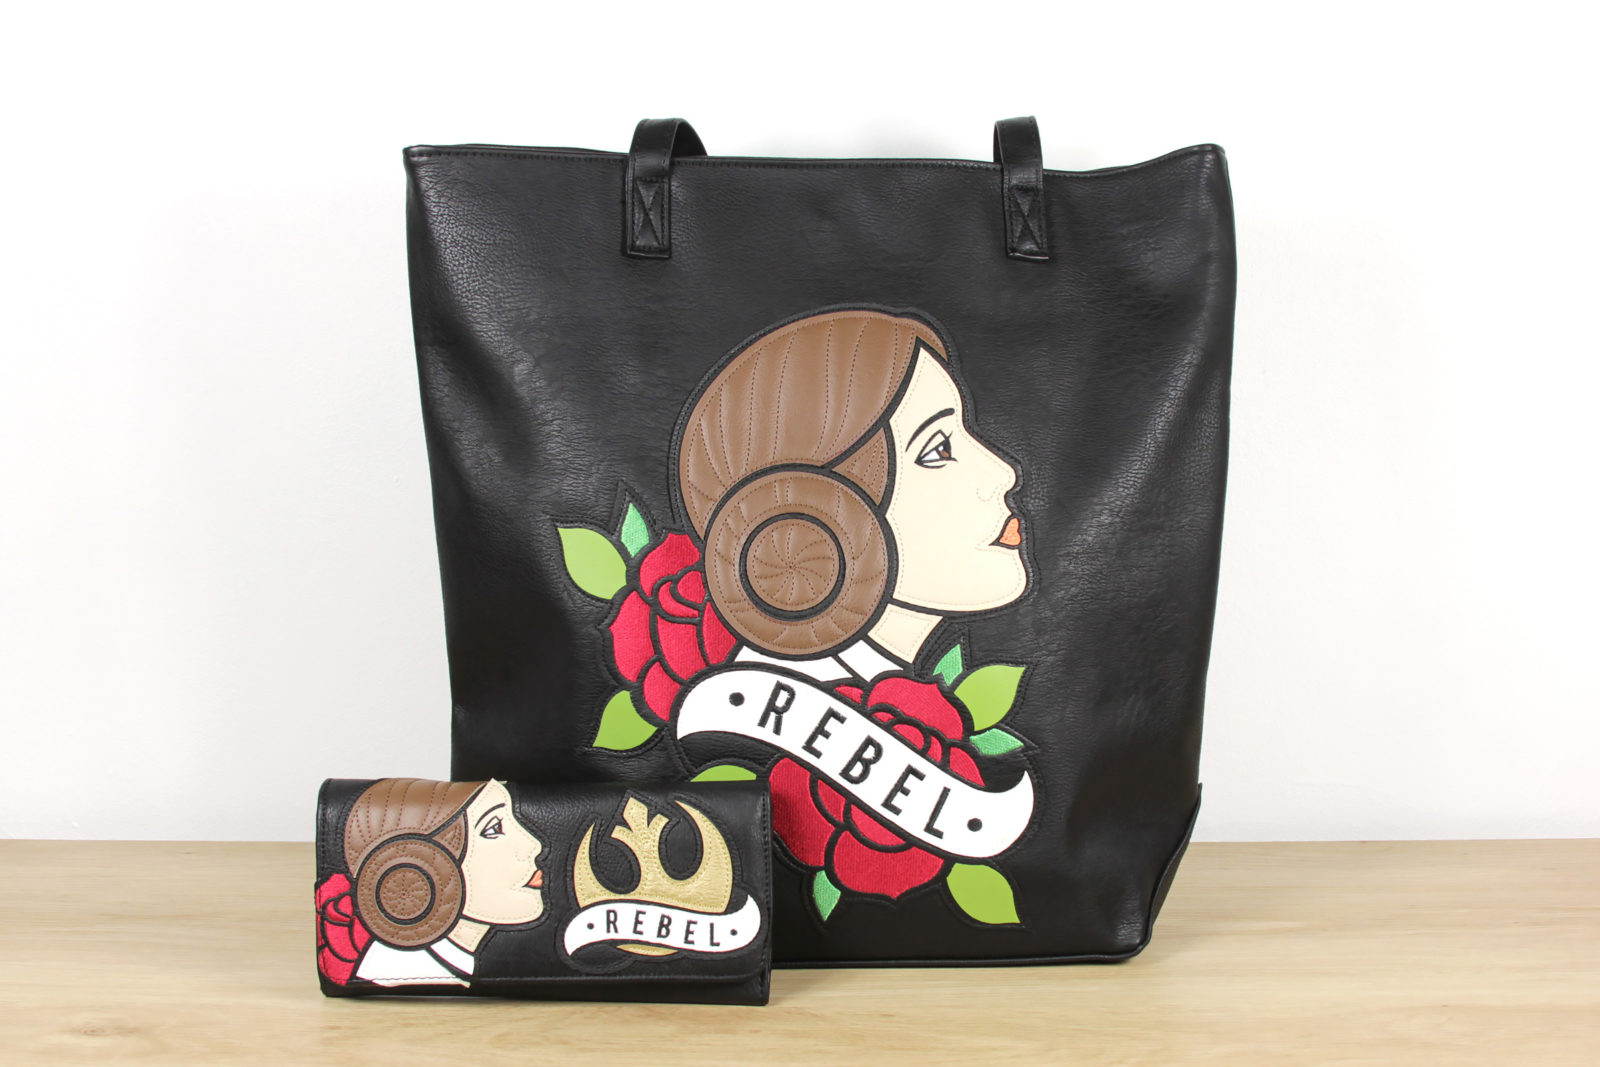 Loungefly x Star Wars Princess Leia Tote Bag and Wallet